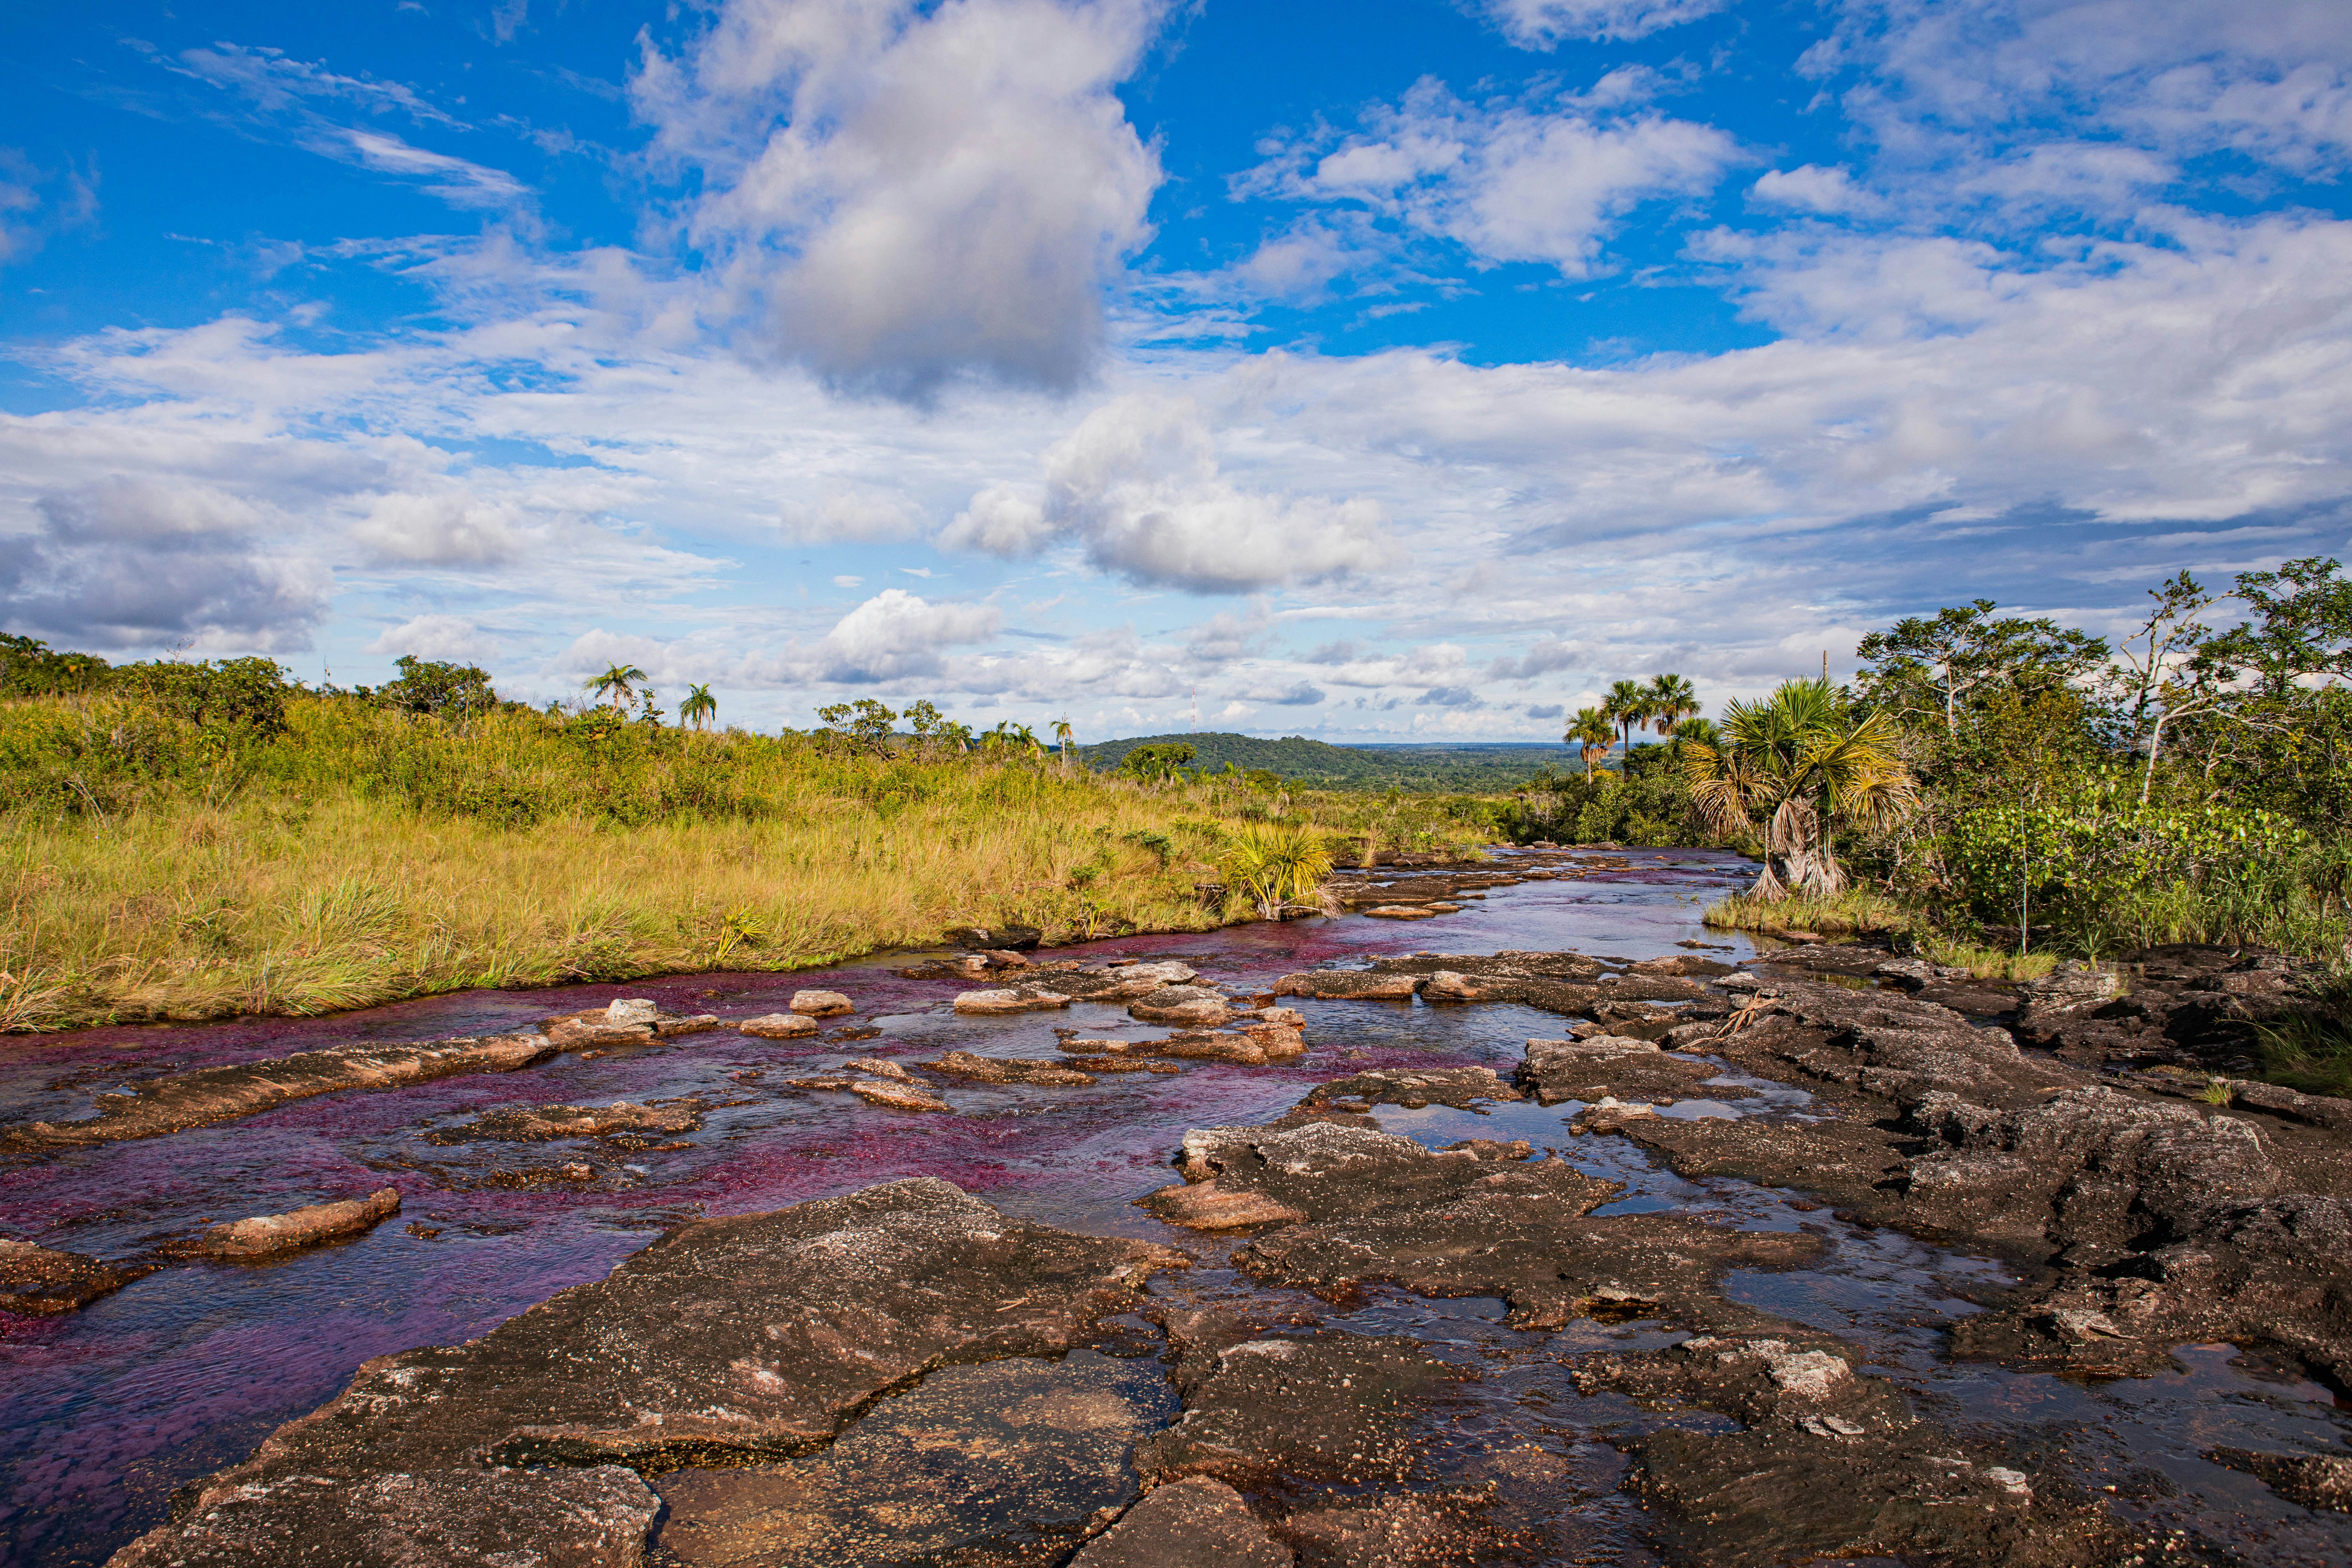 The red algae glows in the Cano Cristales river near Macarena, Colombia, surrounded by yellow grasses and blue sky